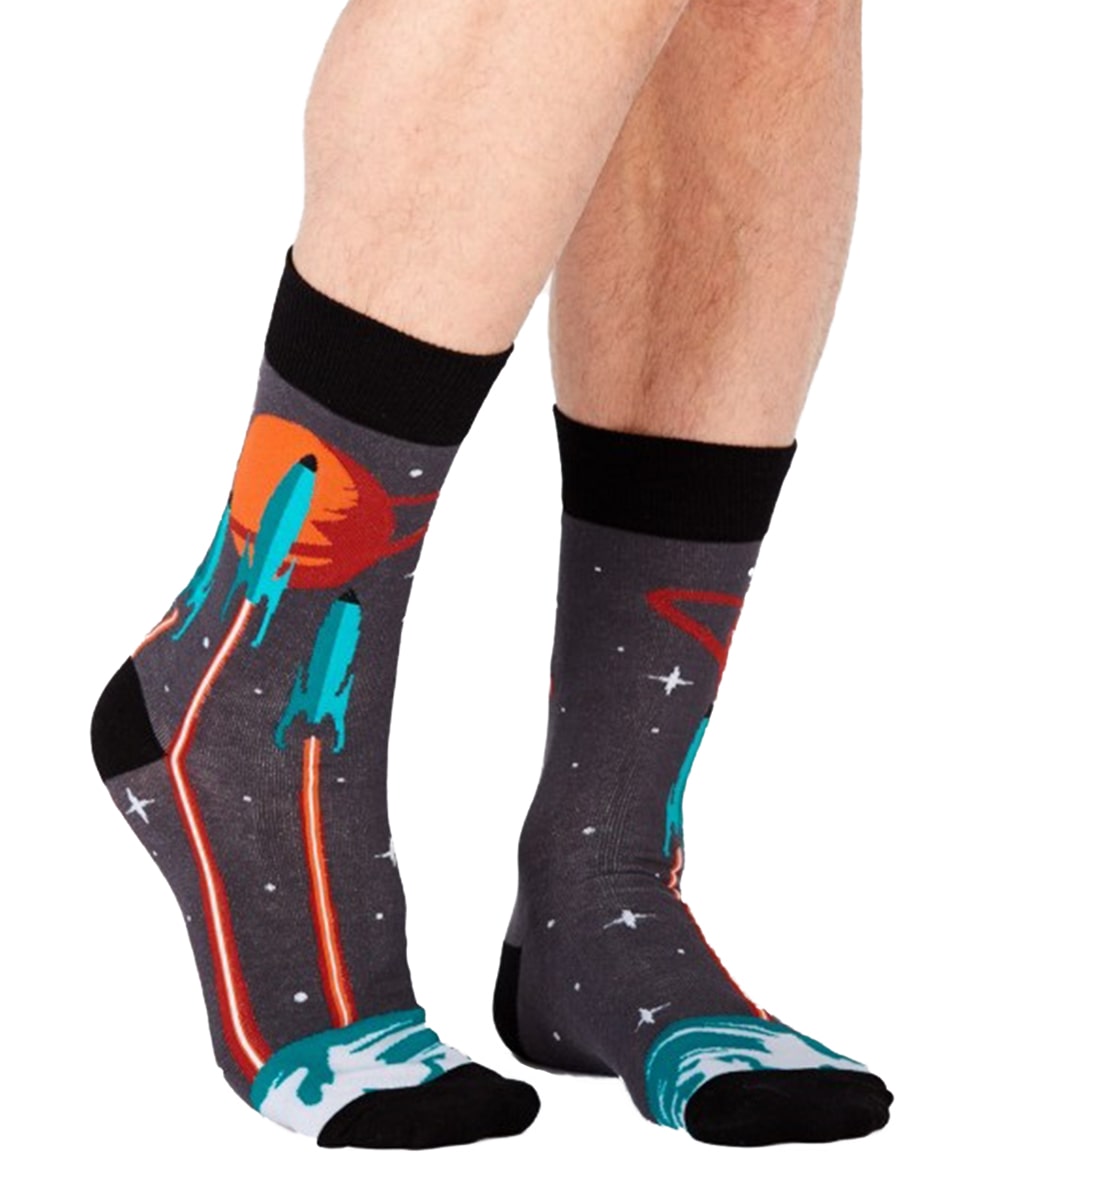 SOCK it to me Men's Crew Socks (mef0289),Launch From Earth - Launch From Earth,One Size